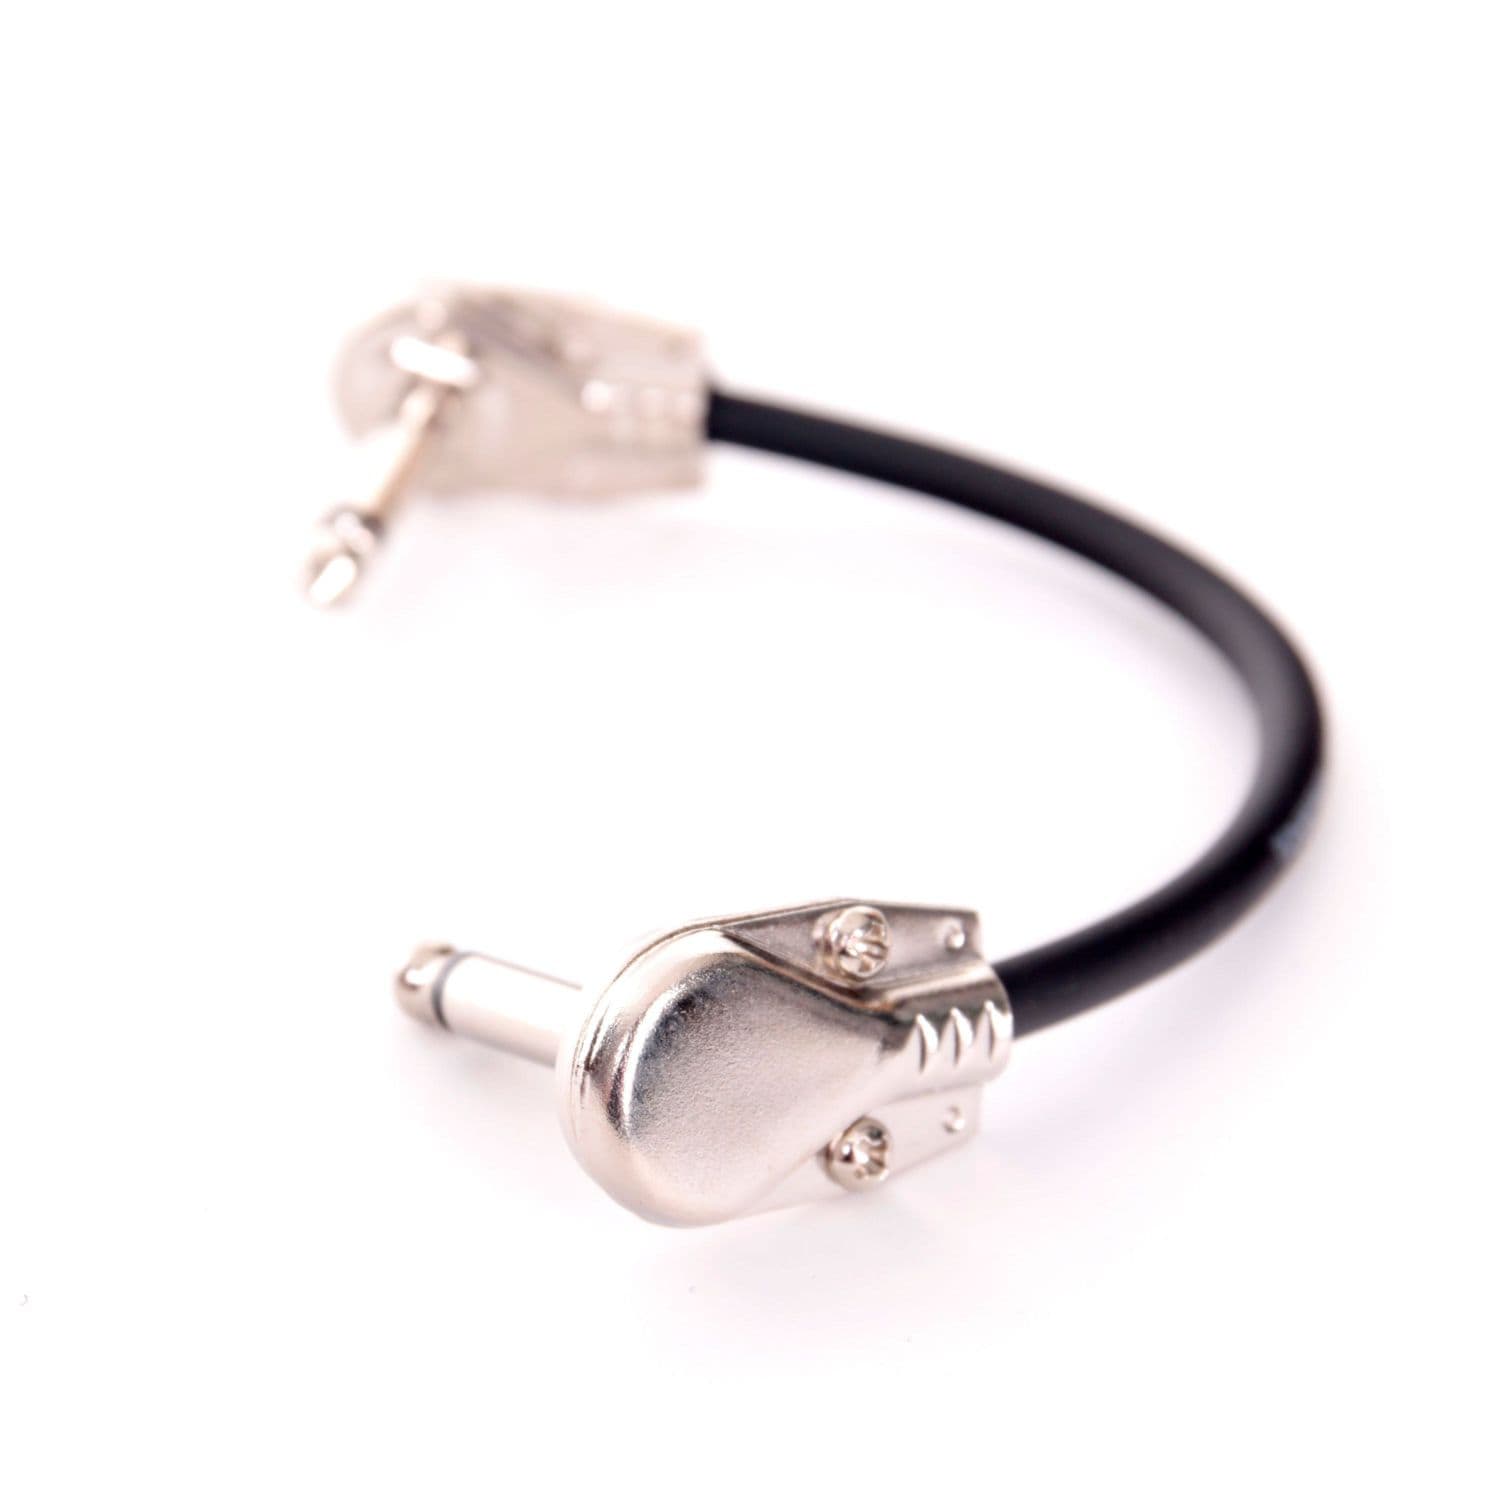 An image of Guitar Patch Cable - TourTech Mono Angled Patch Cable, 15cm | PMT Online